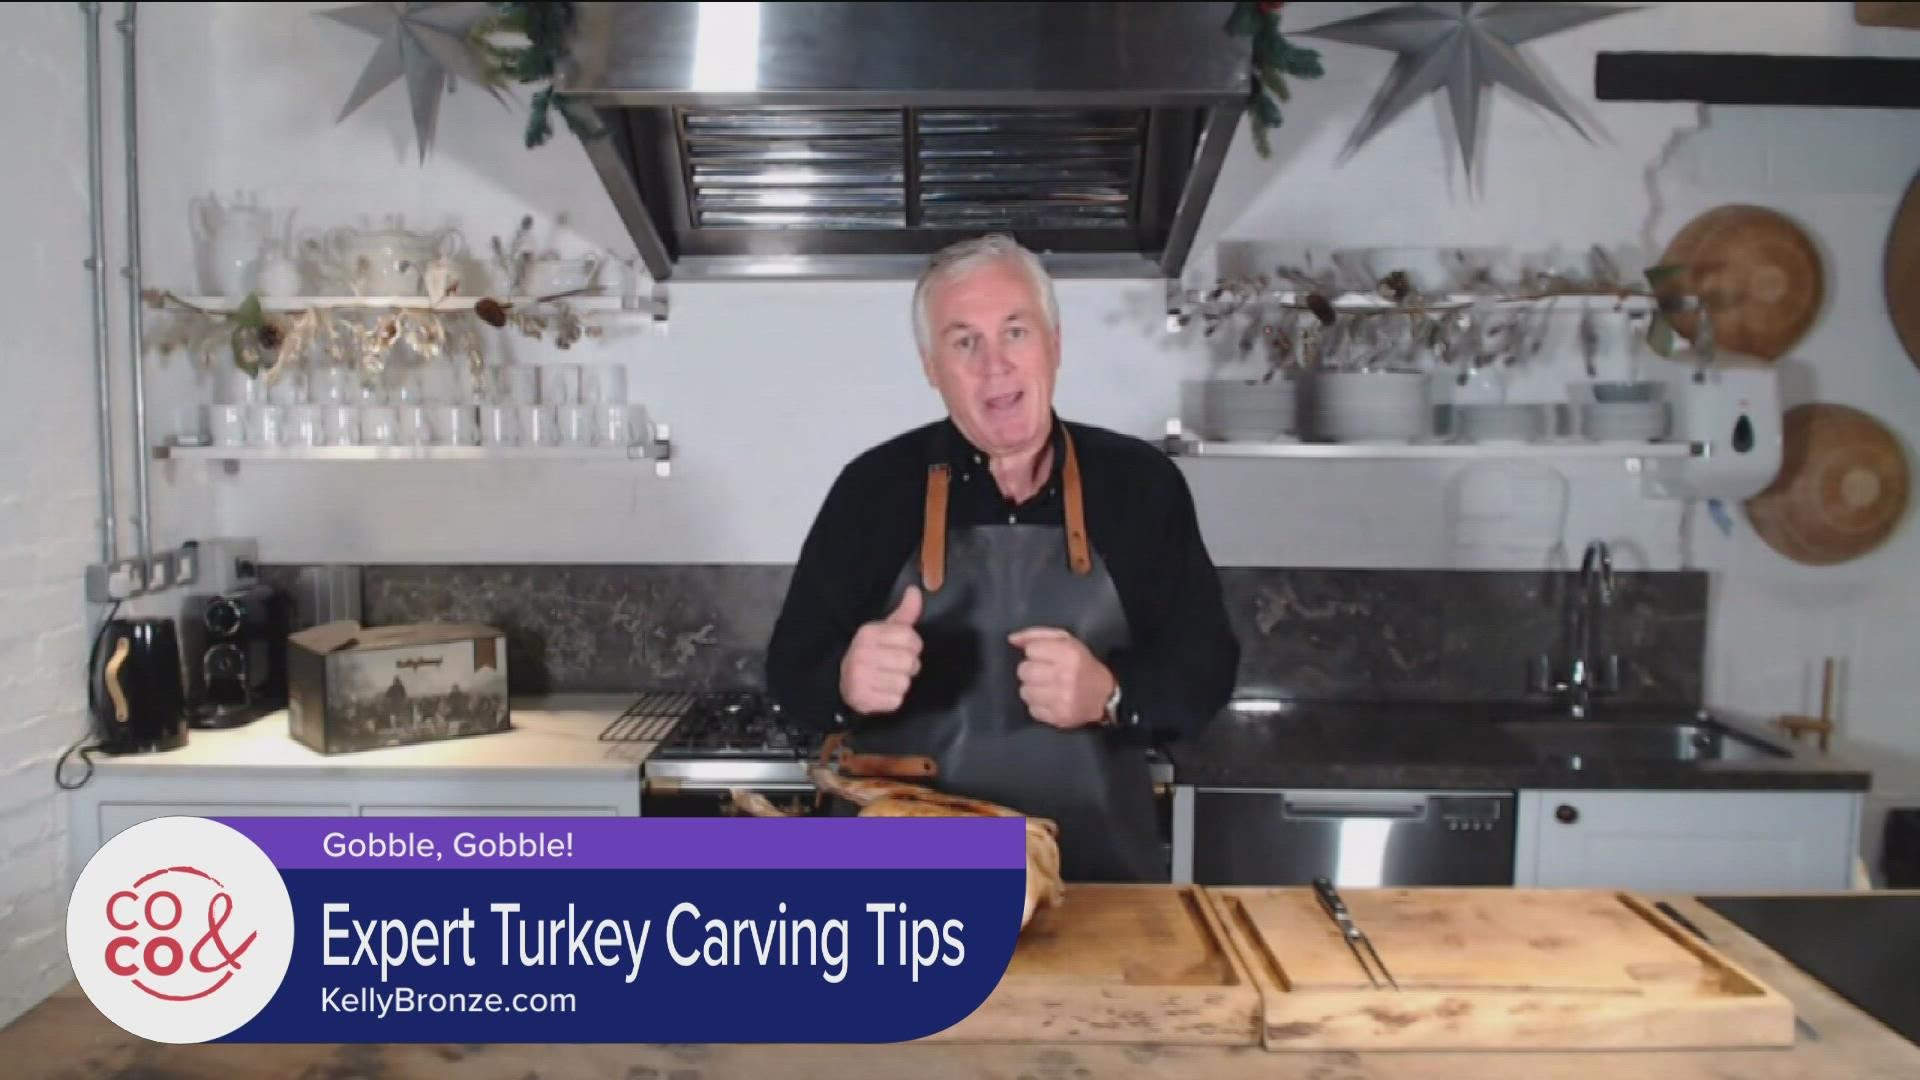 Feeling a little intimidated by carving the turkey? Don't worry. Get some tips from Paul Kelly of KellyBronze.com on how to carve the bird into it's "primals".